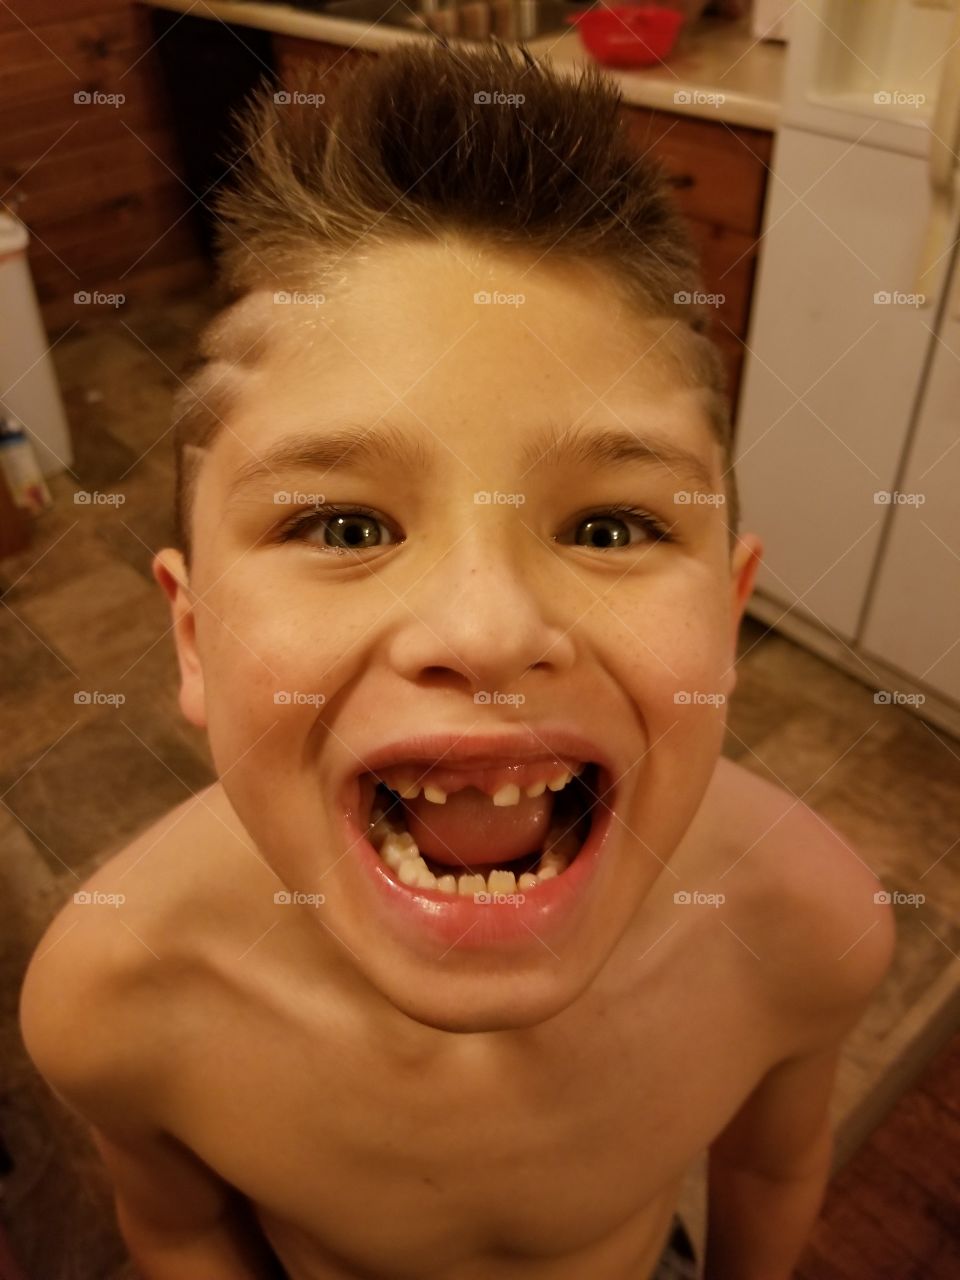 Lost Tooth